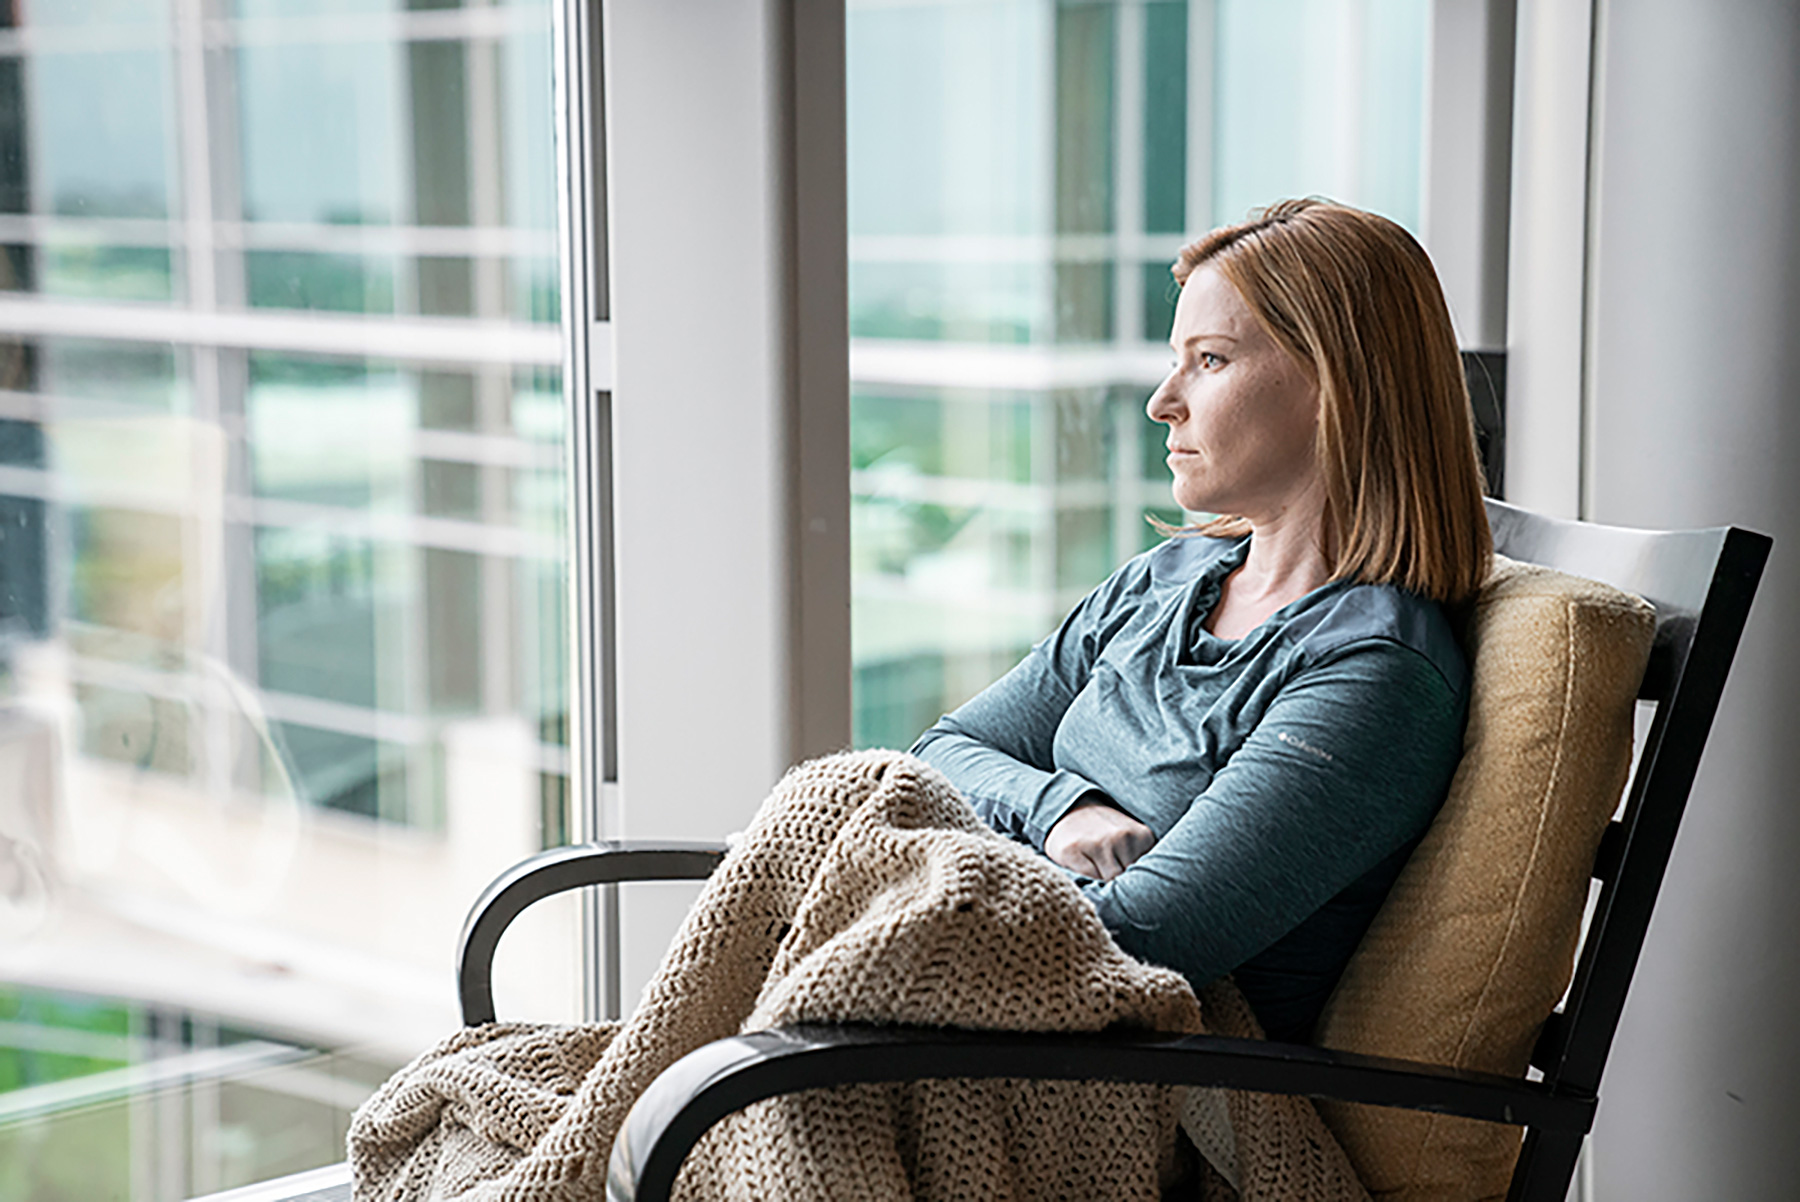 Woman sitting in chair with a blanket on her lap while staring out a window